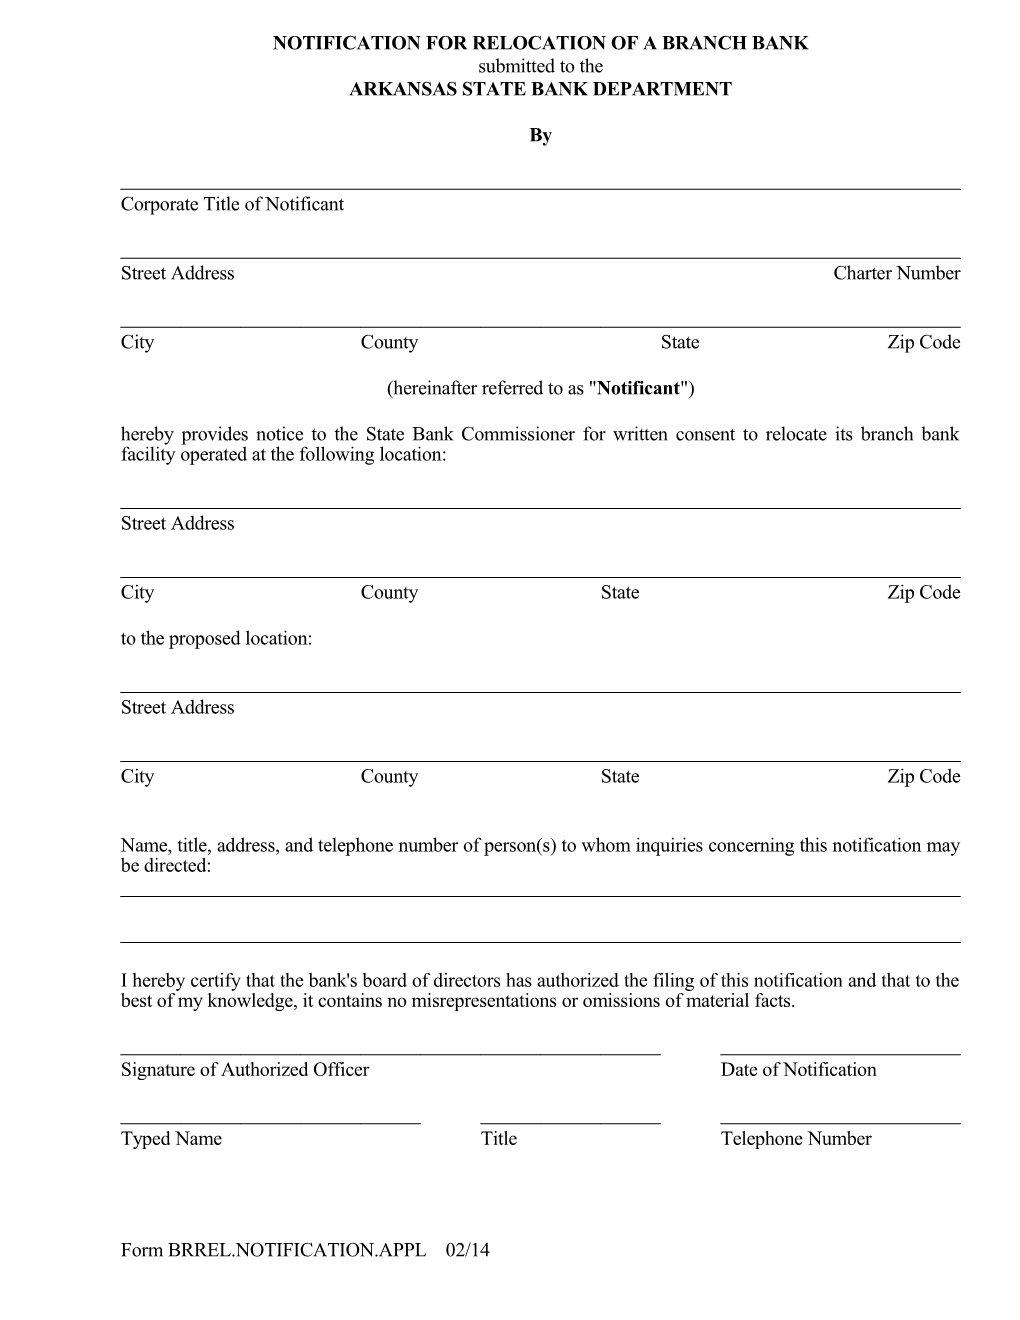 Application for Relocation of a Branch Bank